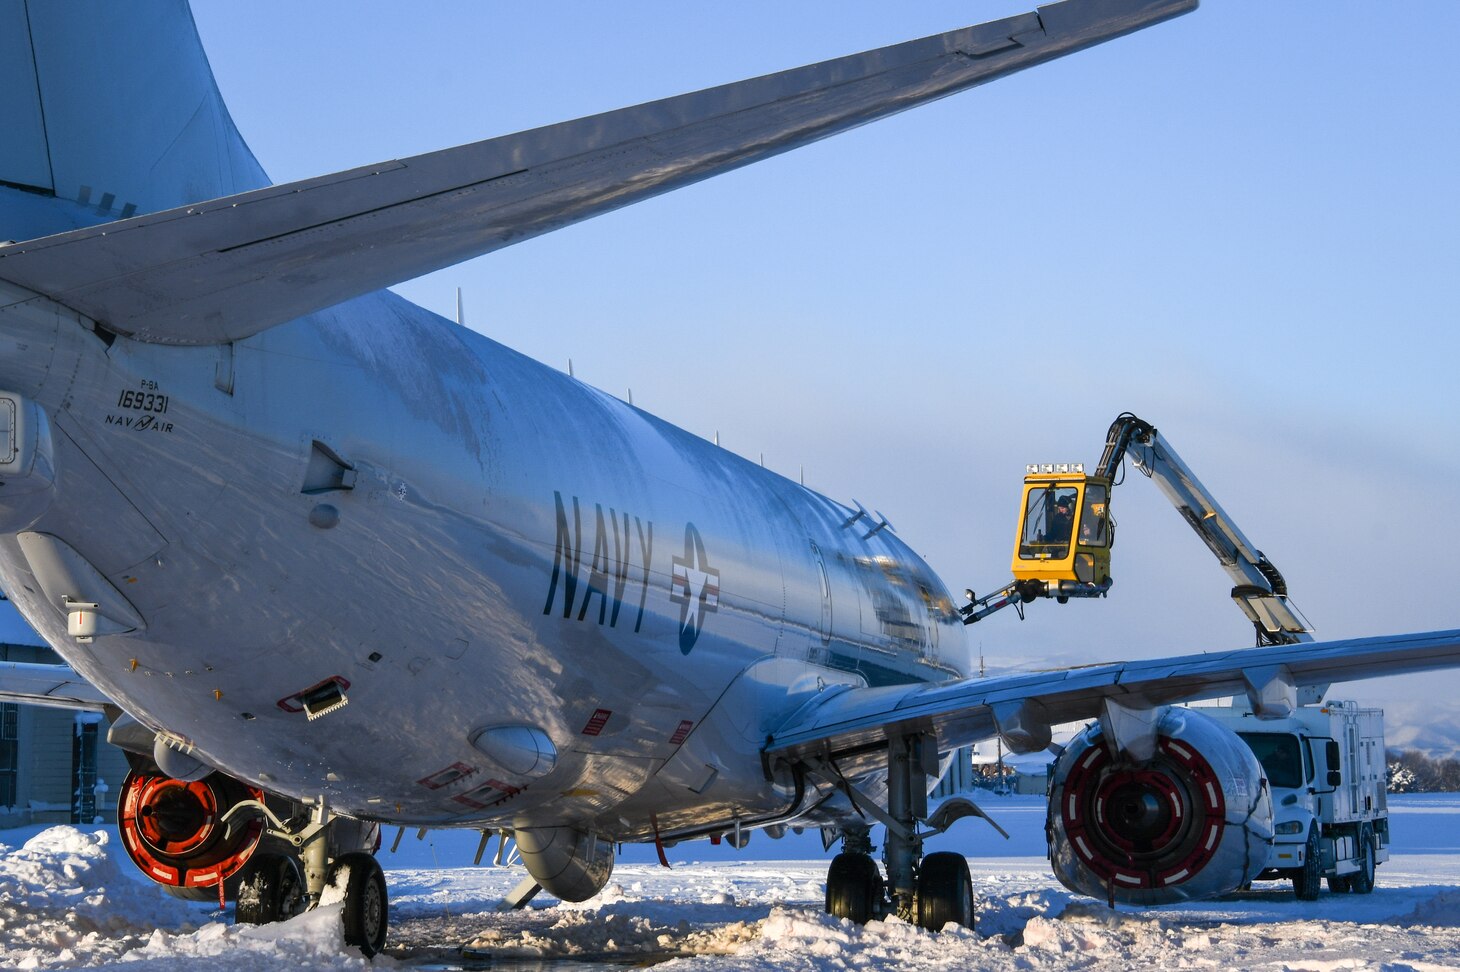 MISAWA, Japan (Jan. 5, 2022) Aviation Electrician’s Mate Airman James Williams, assigned to the “Golden Swordsmen” of Patrol Squadron (VP) 47, operates a de-icing truck to remove snow and ice from a P-8A Poseidon at Misawa Air Base.